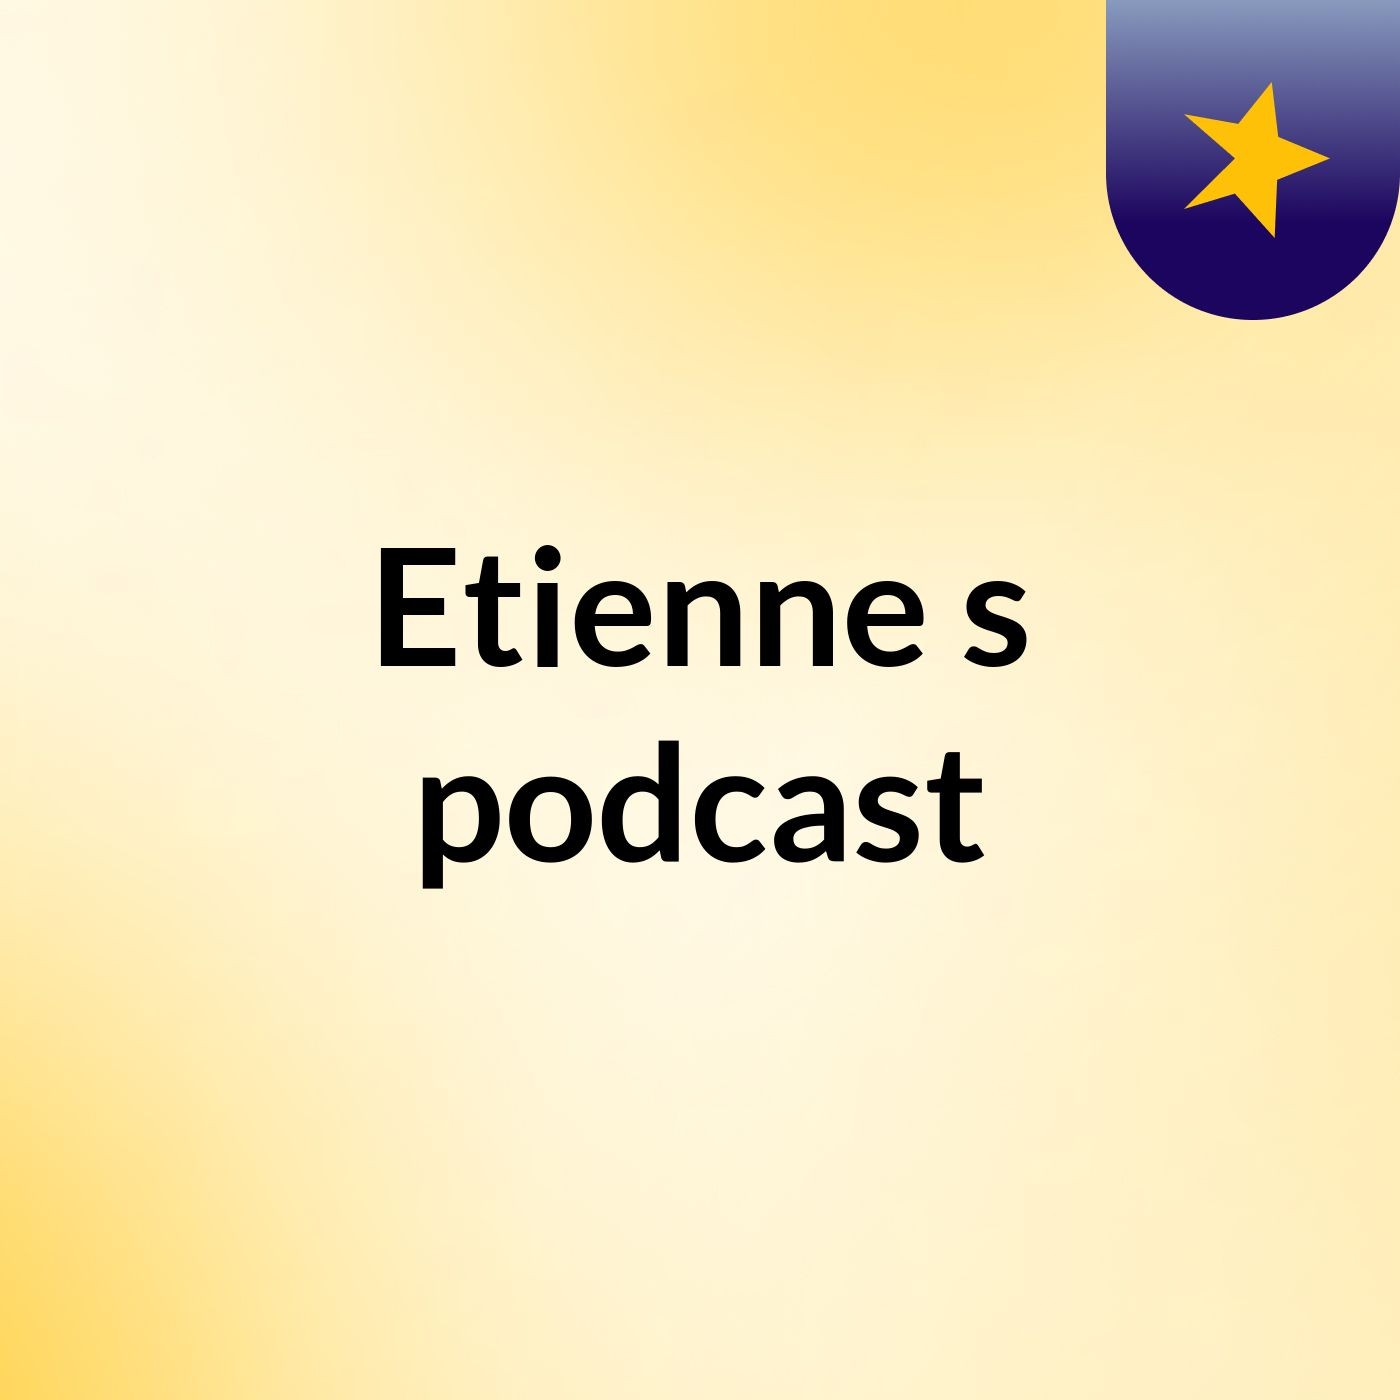 Etienne's podcast